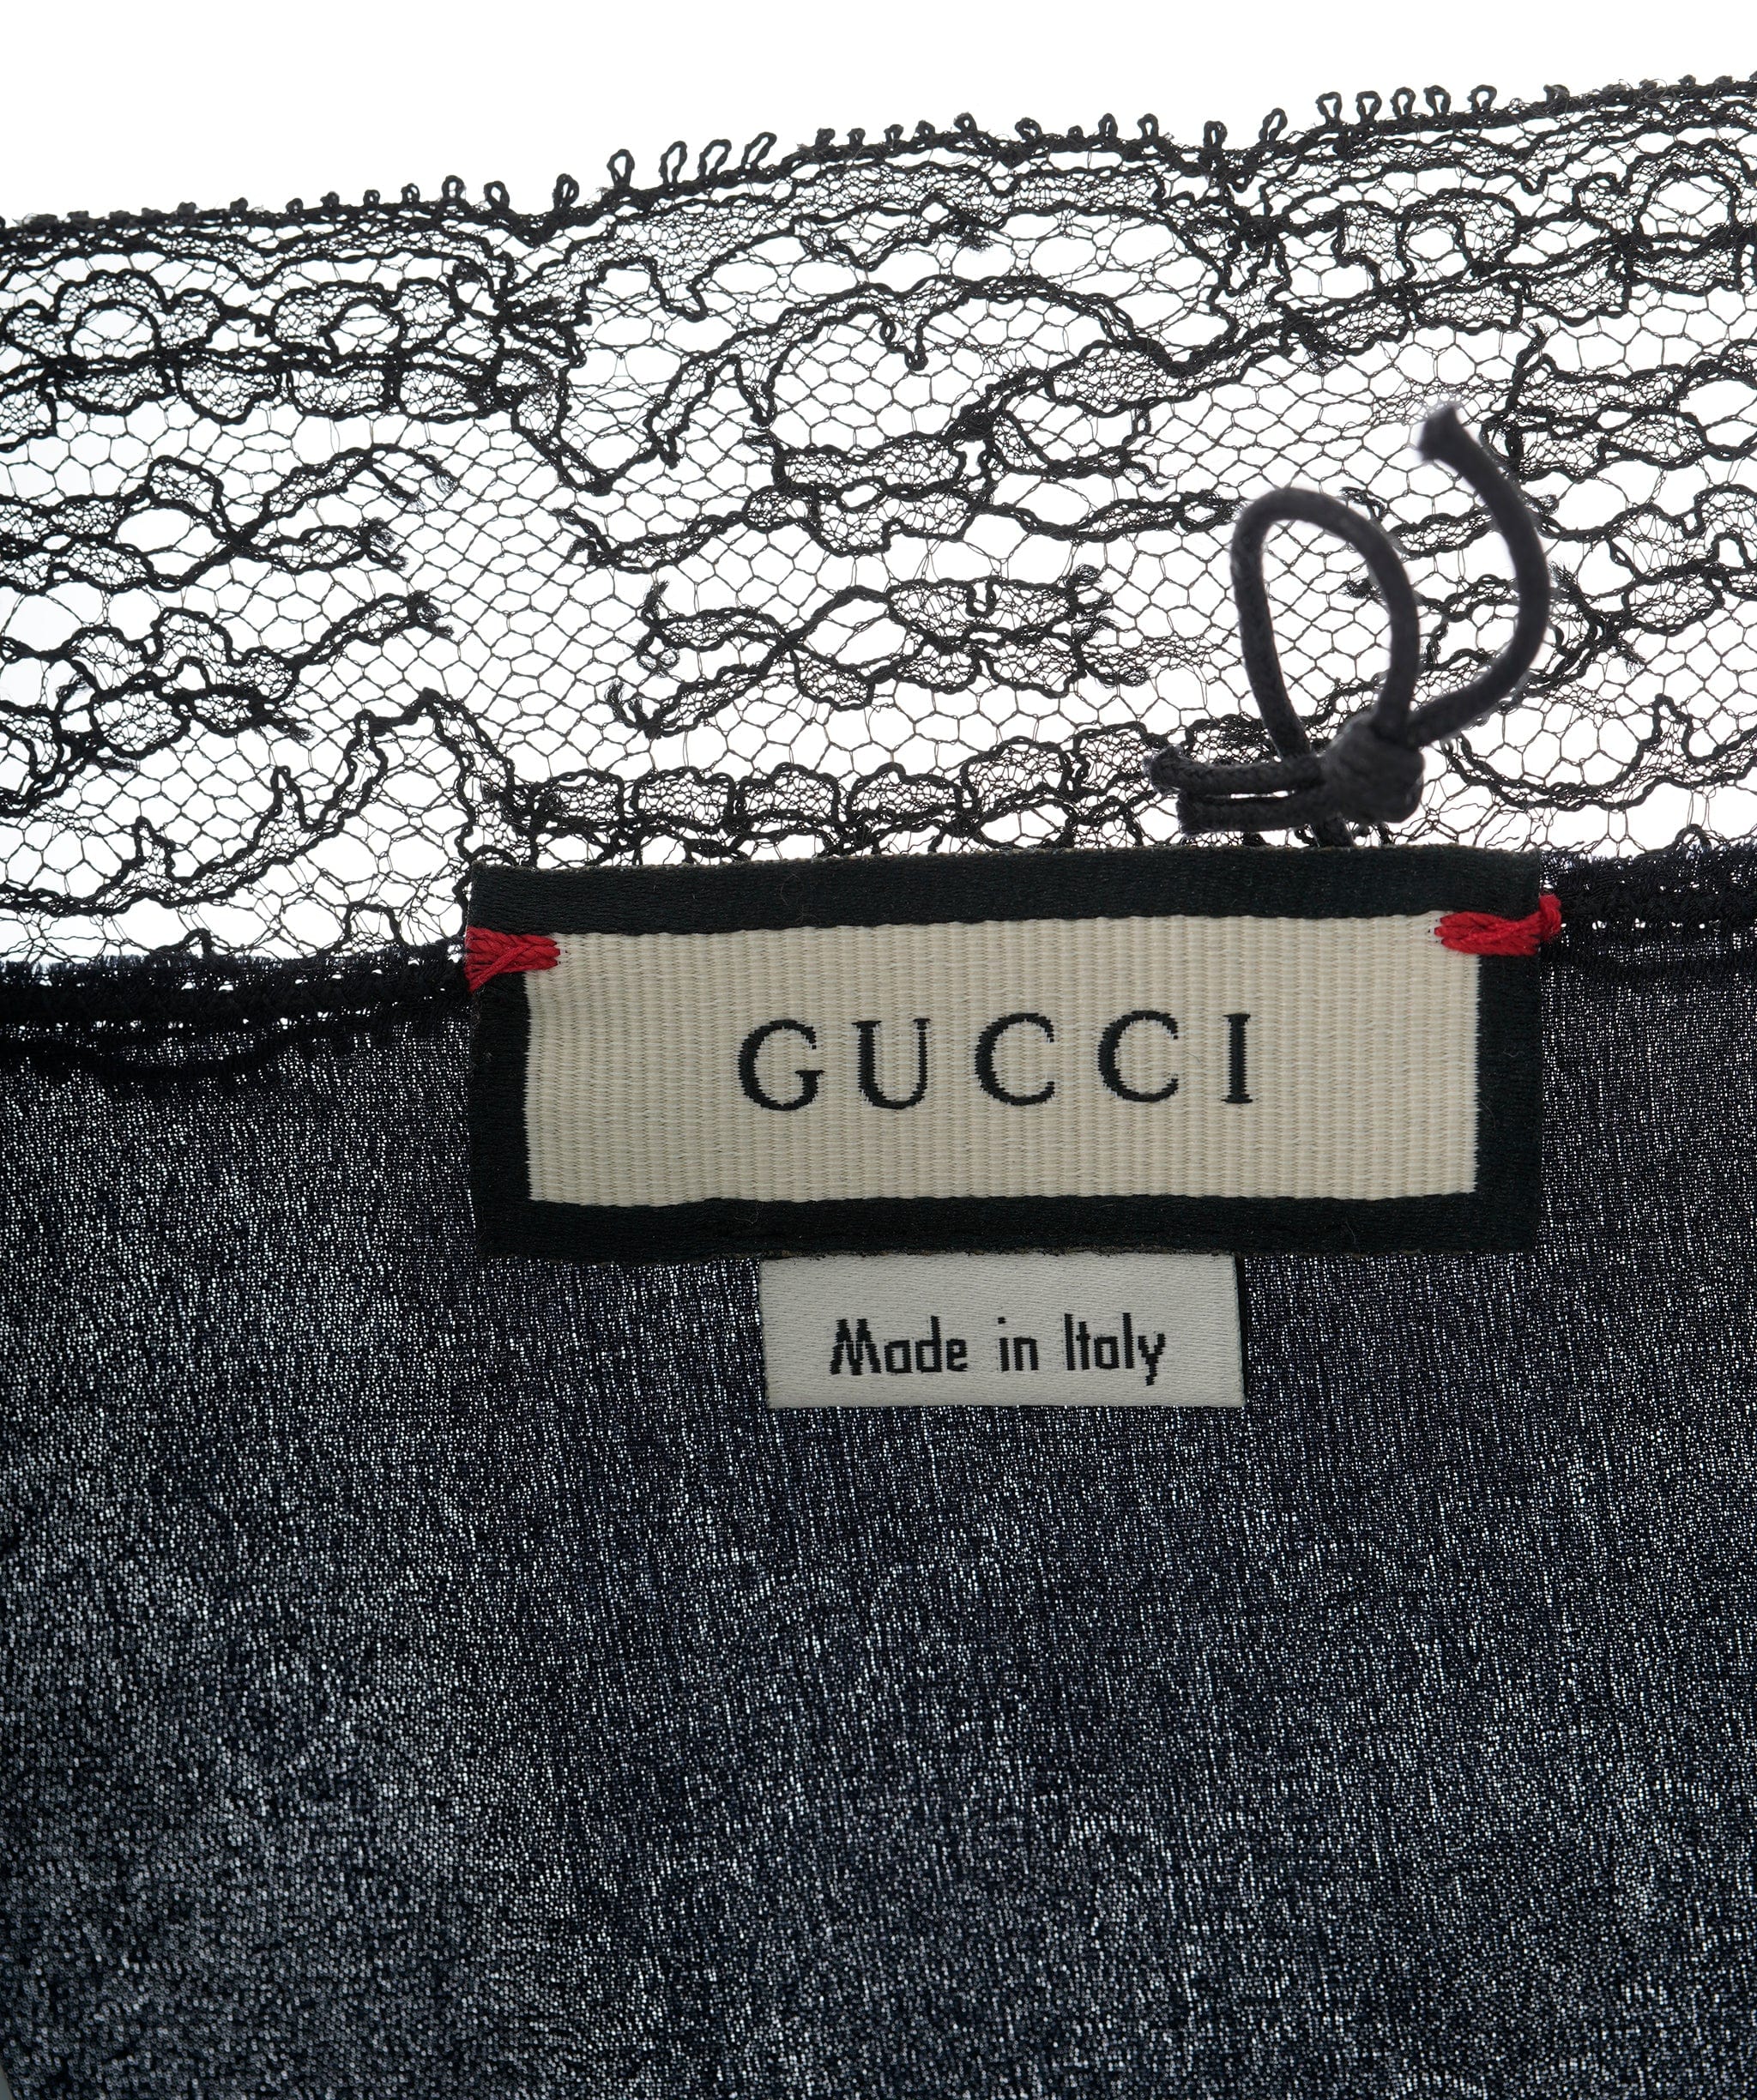 Gucci Gucci sleevless top monogramme black ALC1225